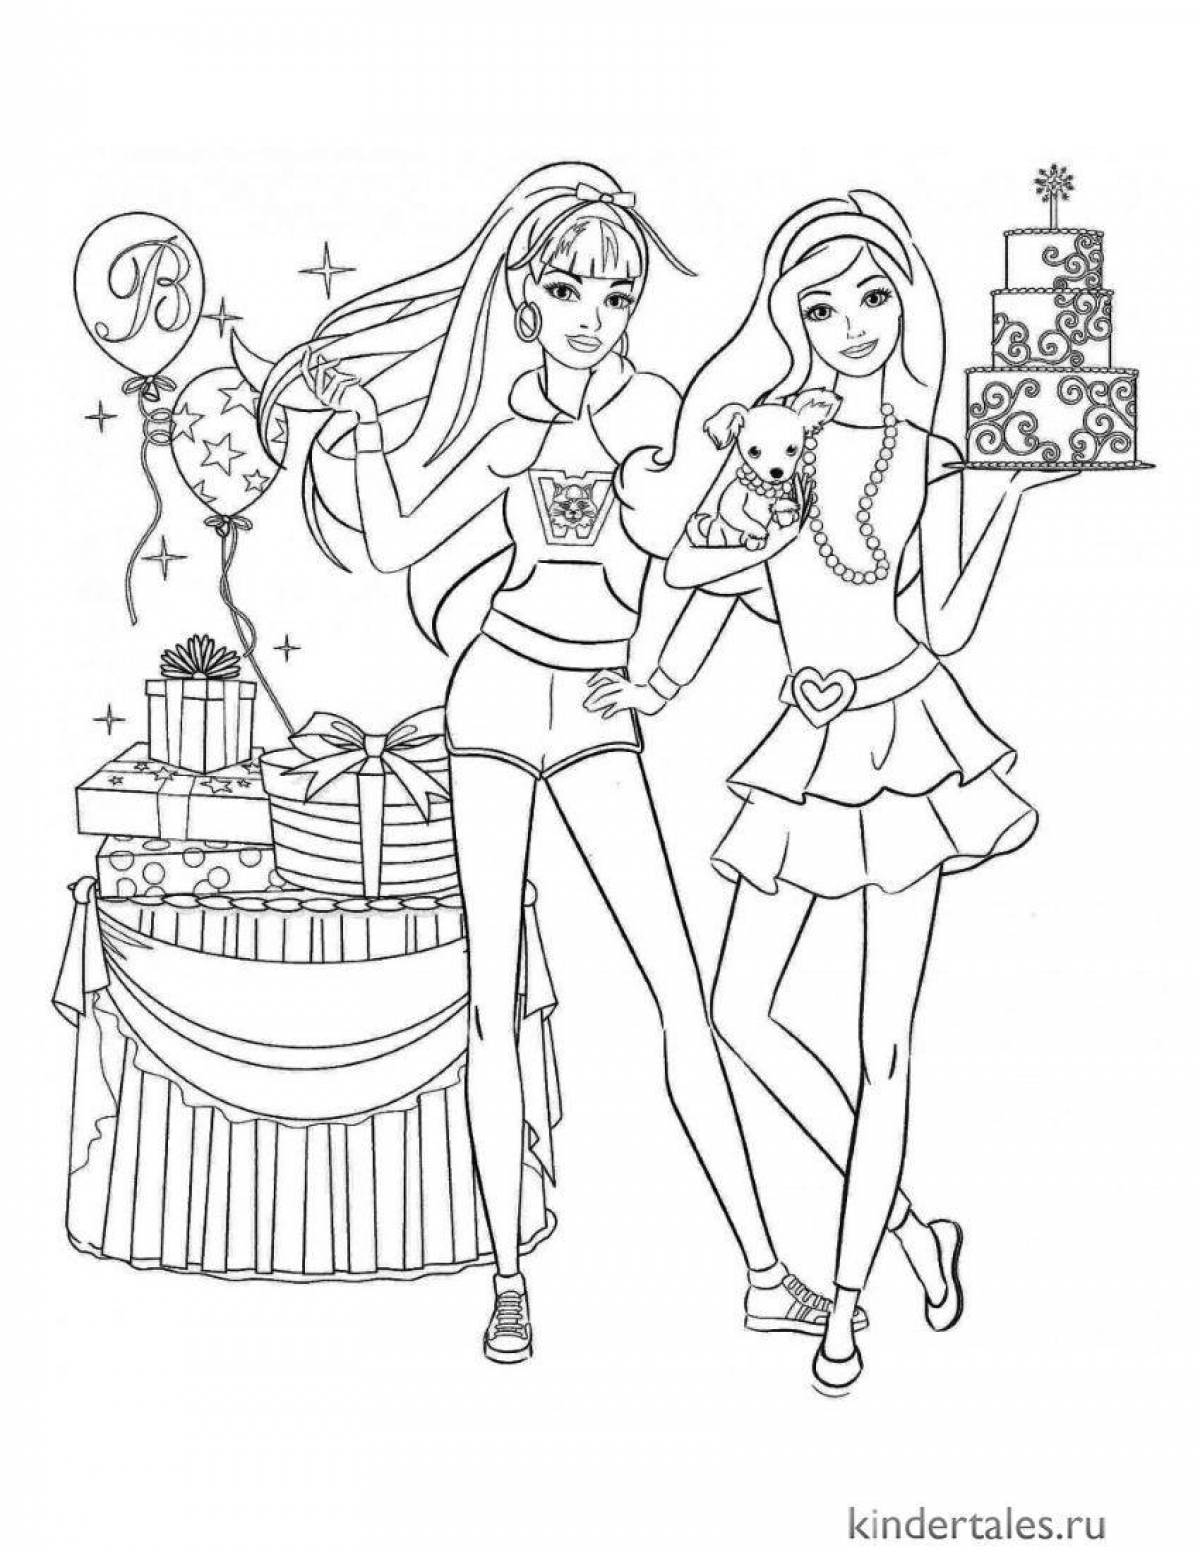 Playful barbie coloring book for kids 6-7 years old